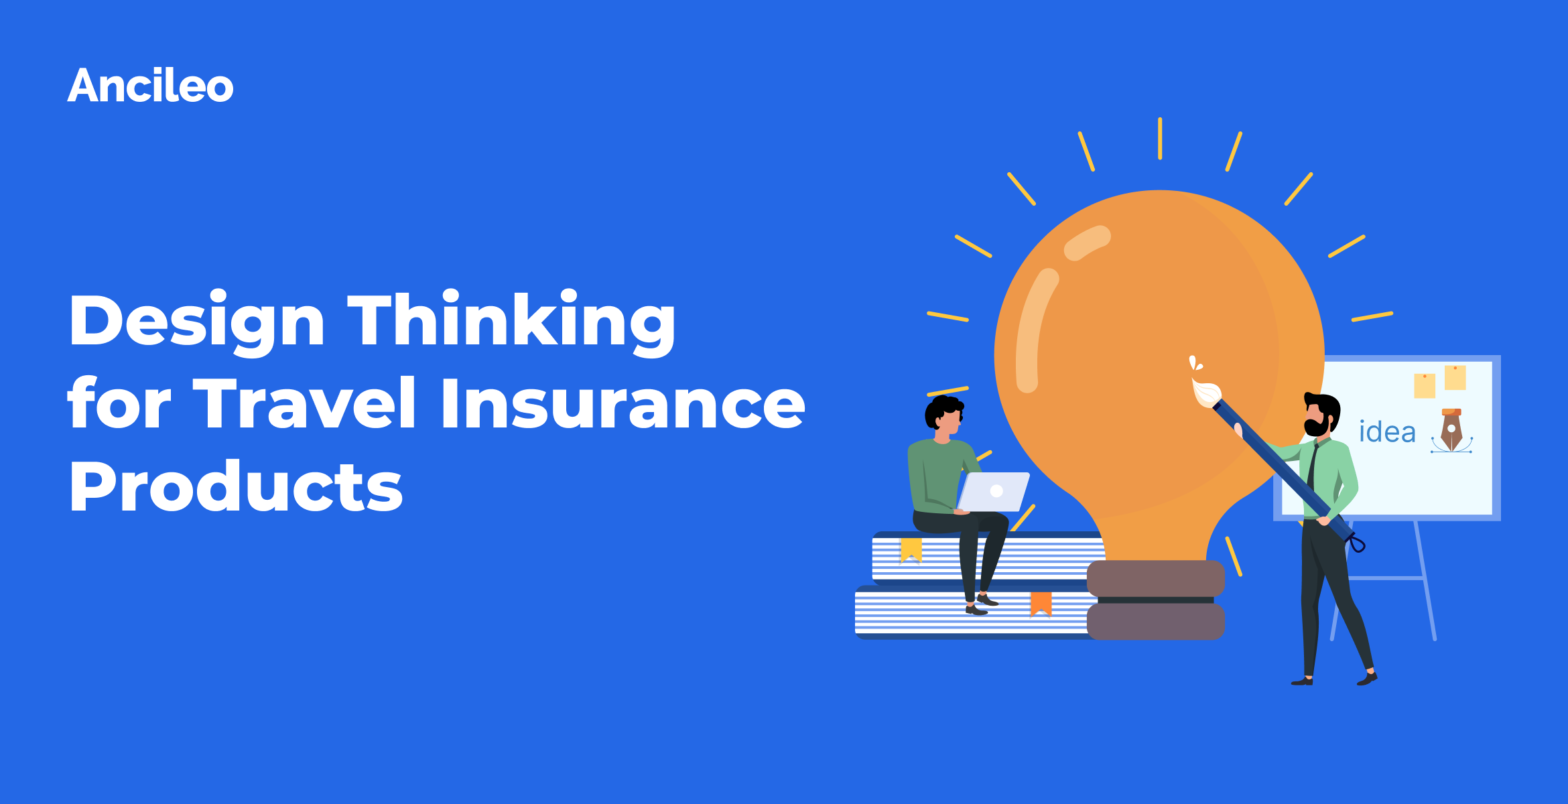 Design Thinking for Travel Insurance Products